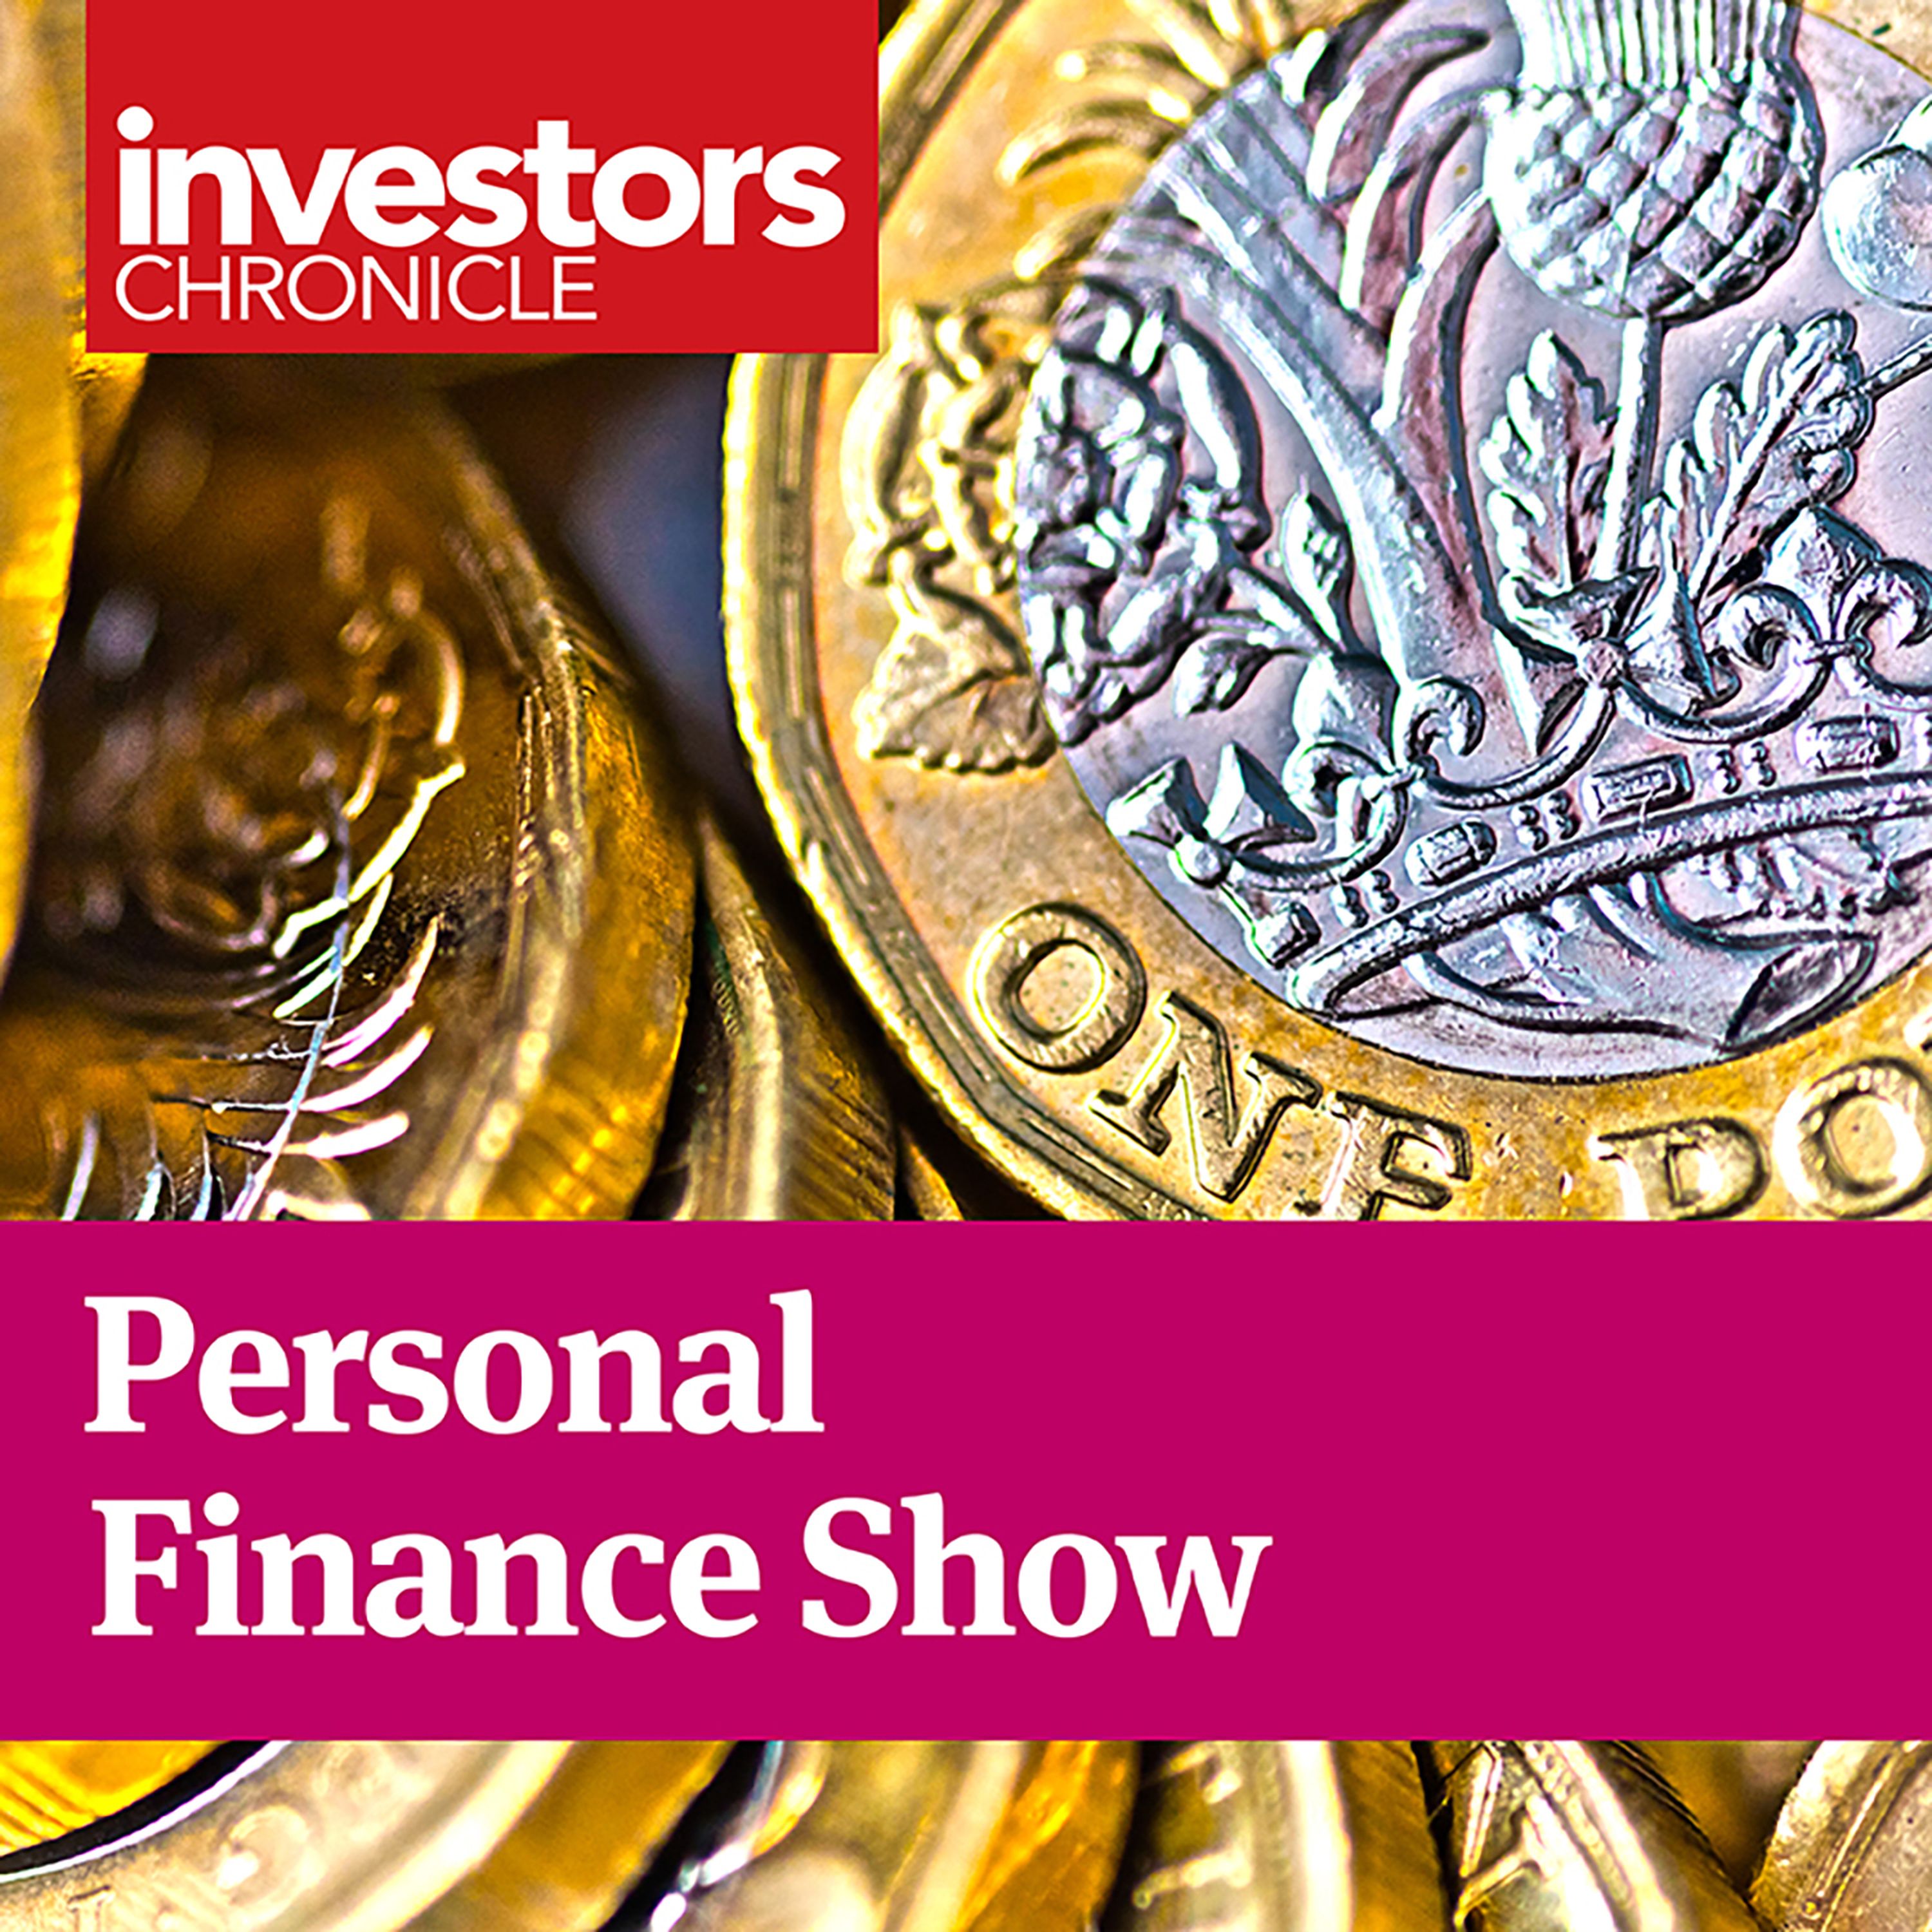 Personal Finance Show: The world's best yields and how to lose less tax